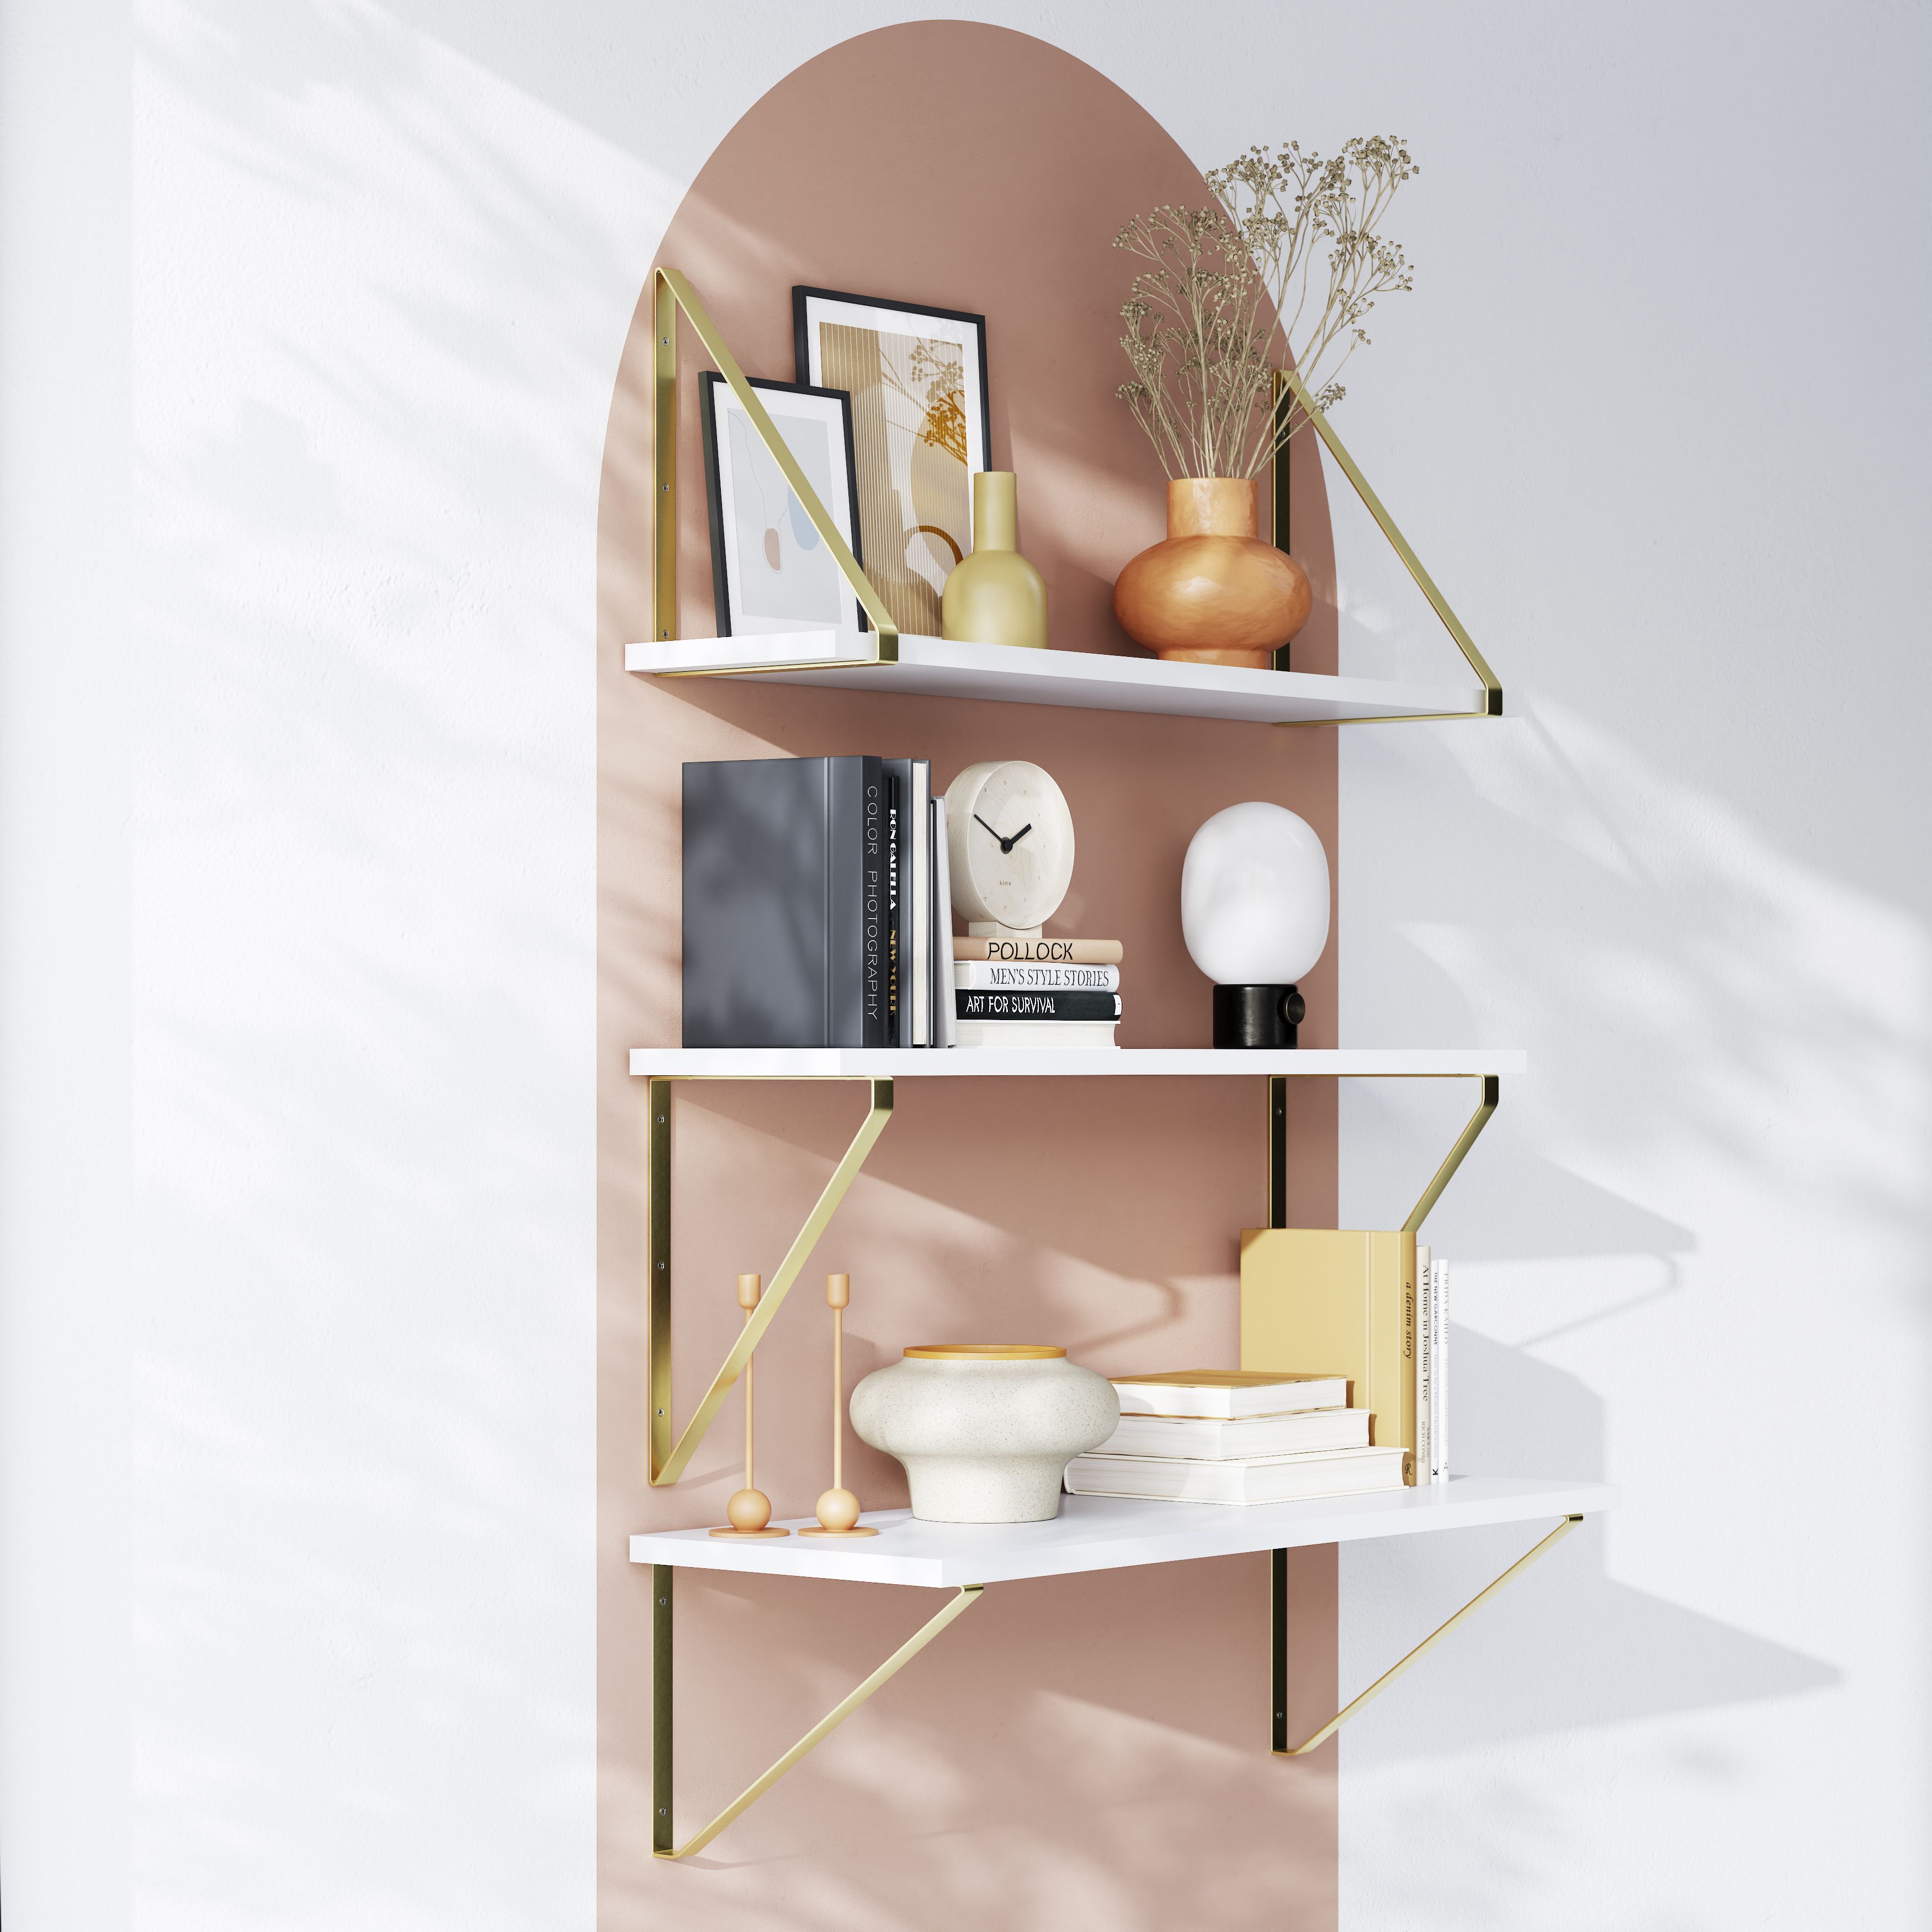 GoodHome Clever Gold effect Steel Shelving bracket (H)280mm (D)200mm